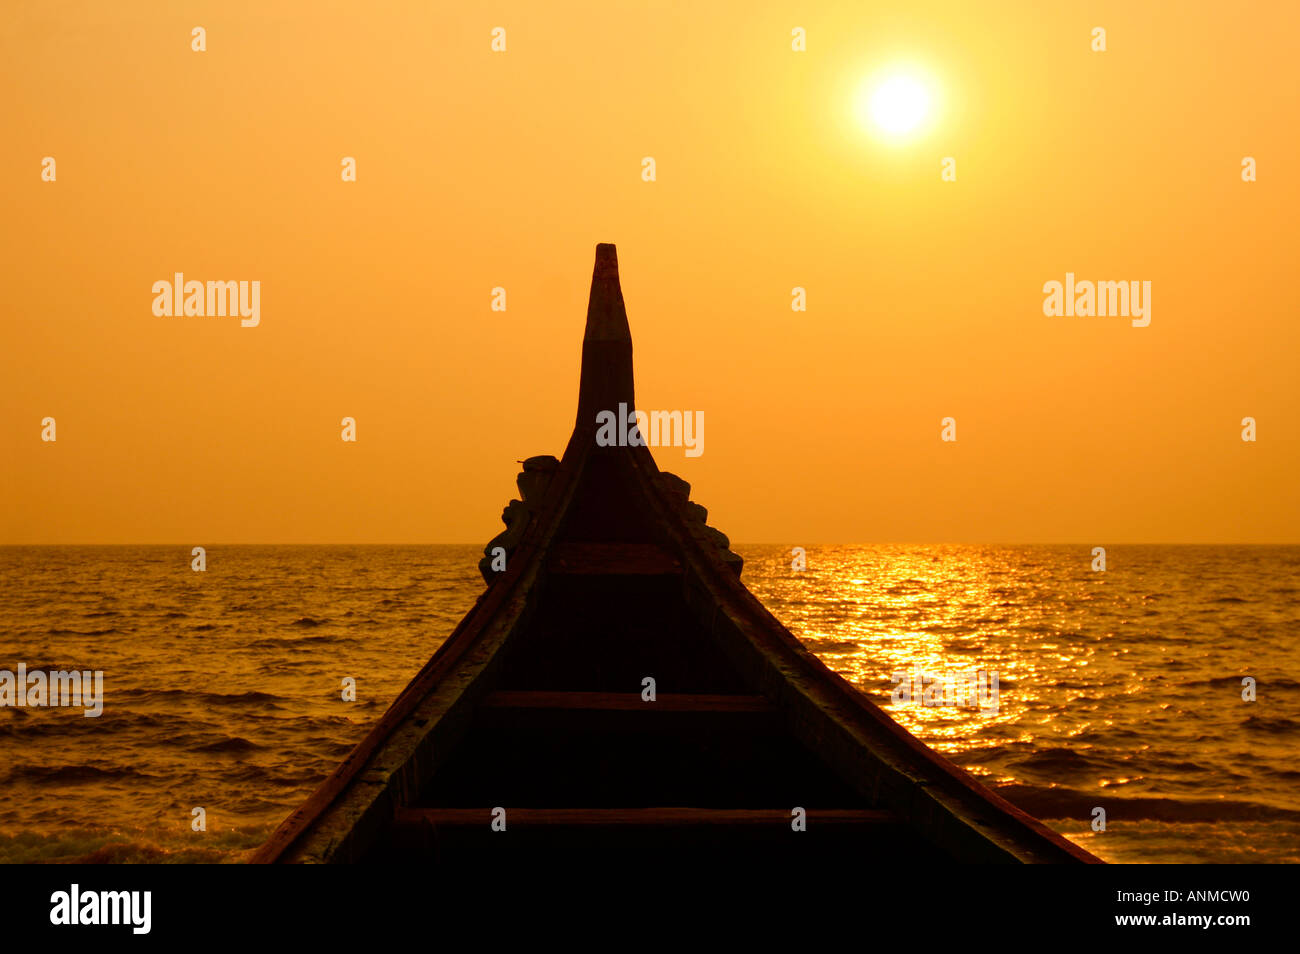 The helm of a boat in the background of the setting sun and sea Stock Photo